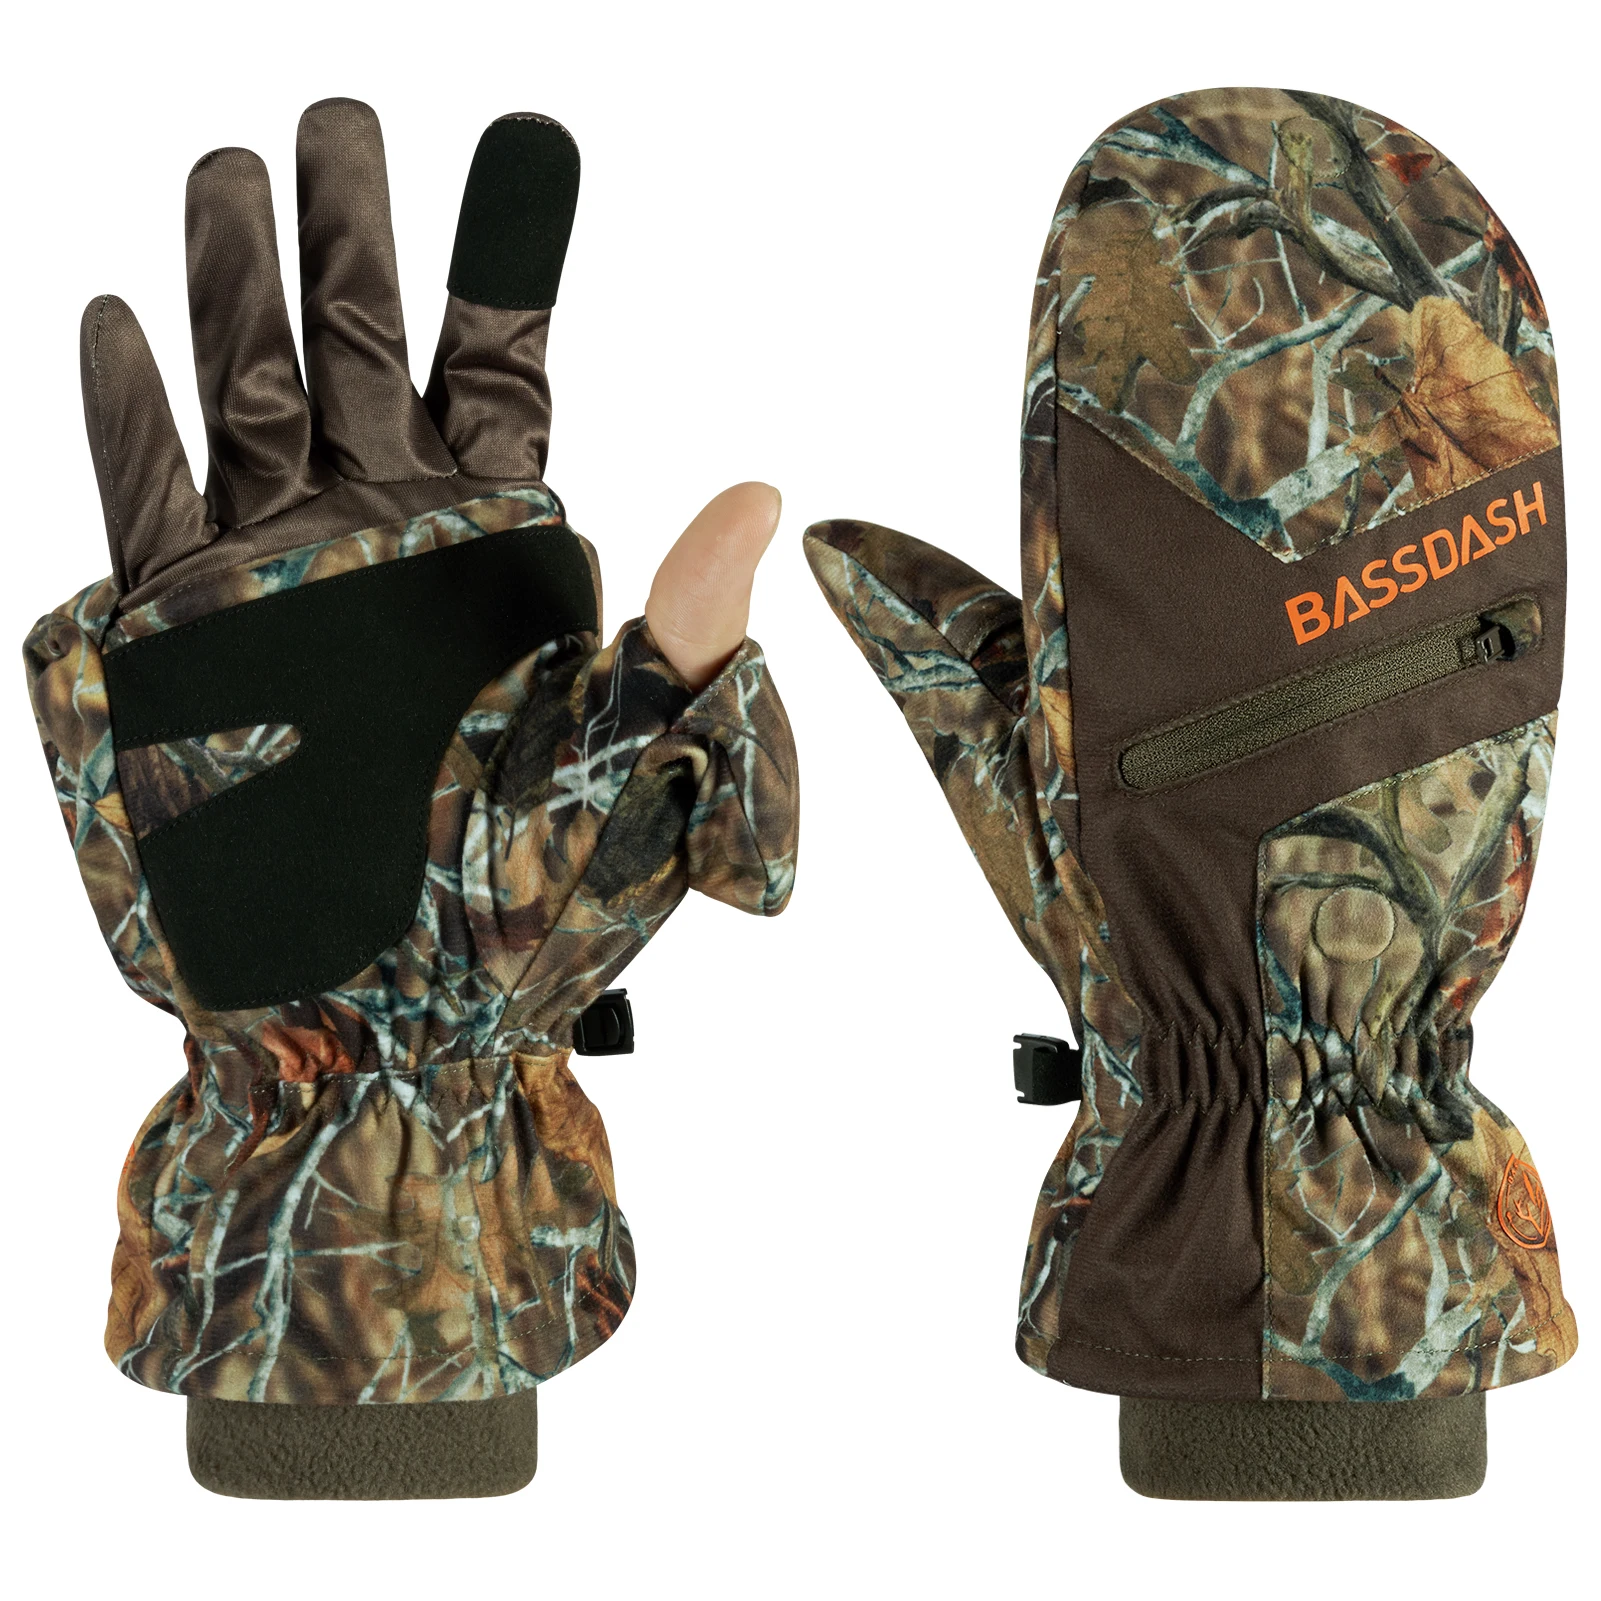 

BASSDASH Men’s Insulated Mittens Winter Camo Hunting Gloves Water Resistant for Cold Weather Outdoor Activities HG04M